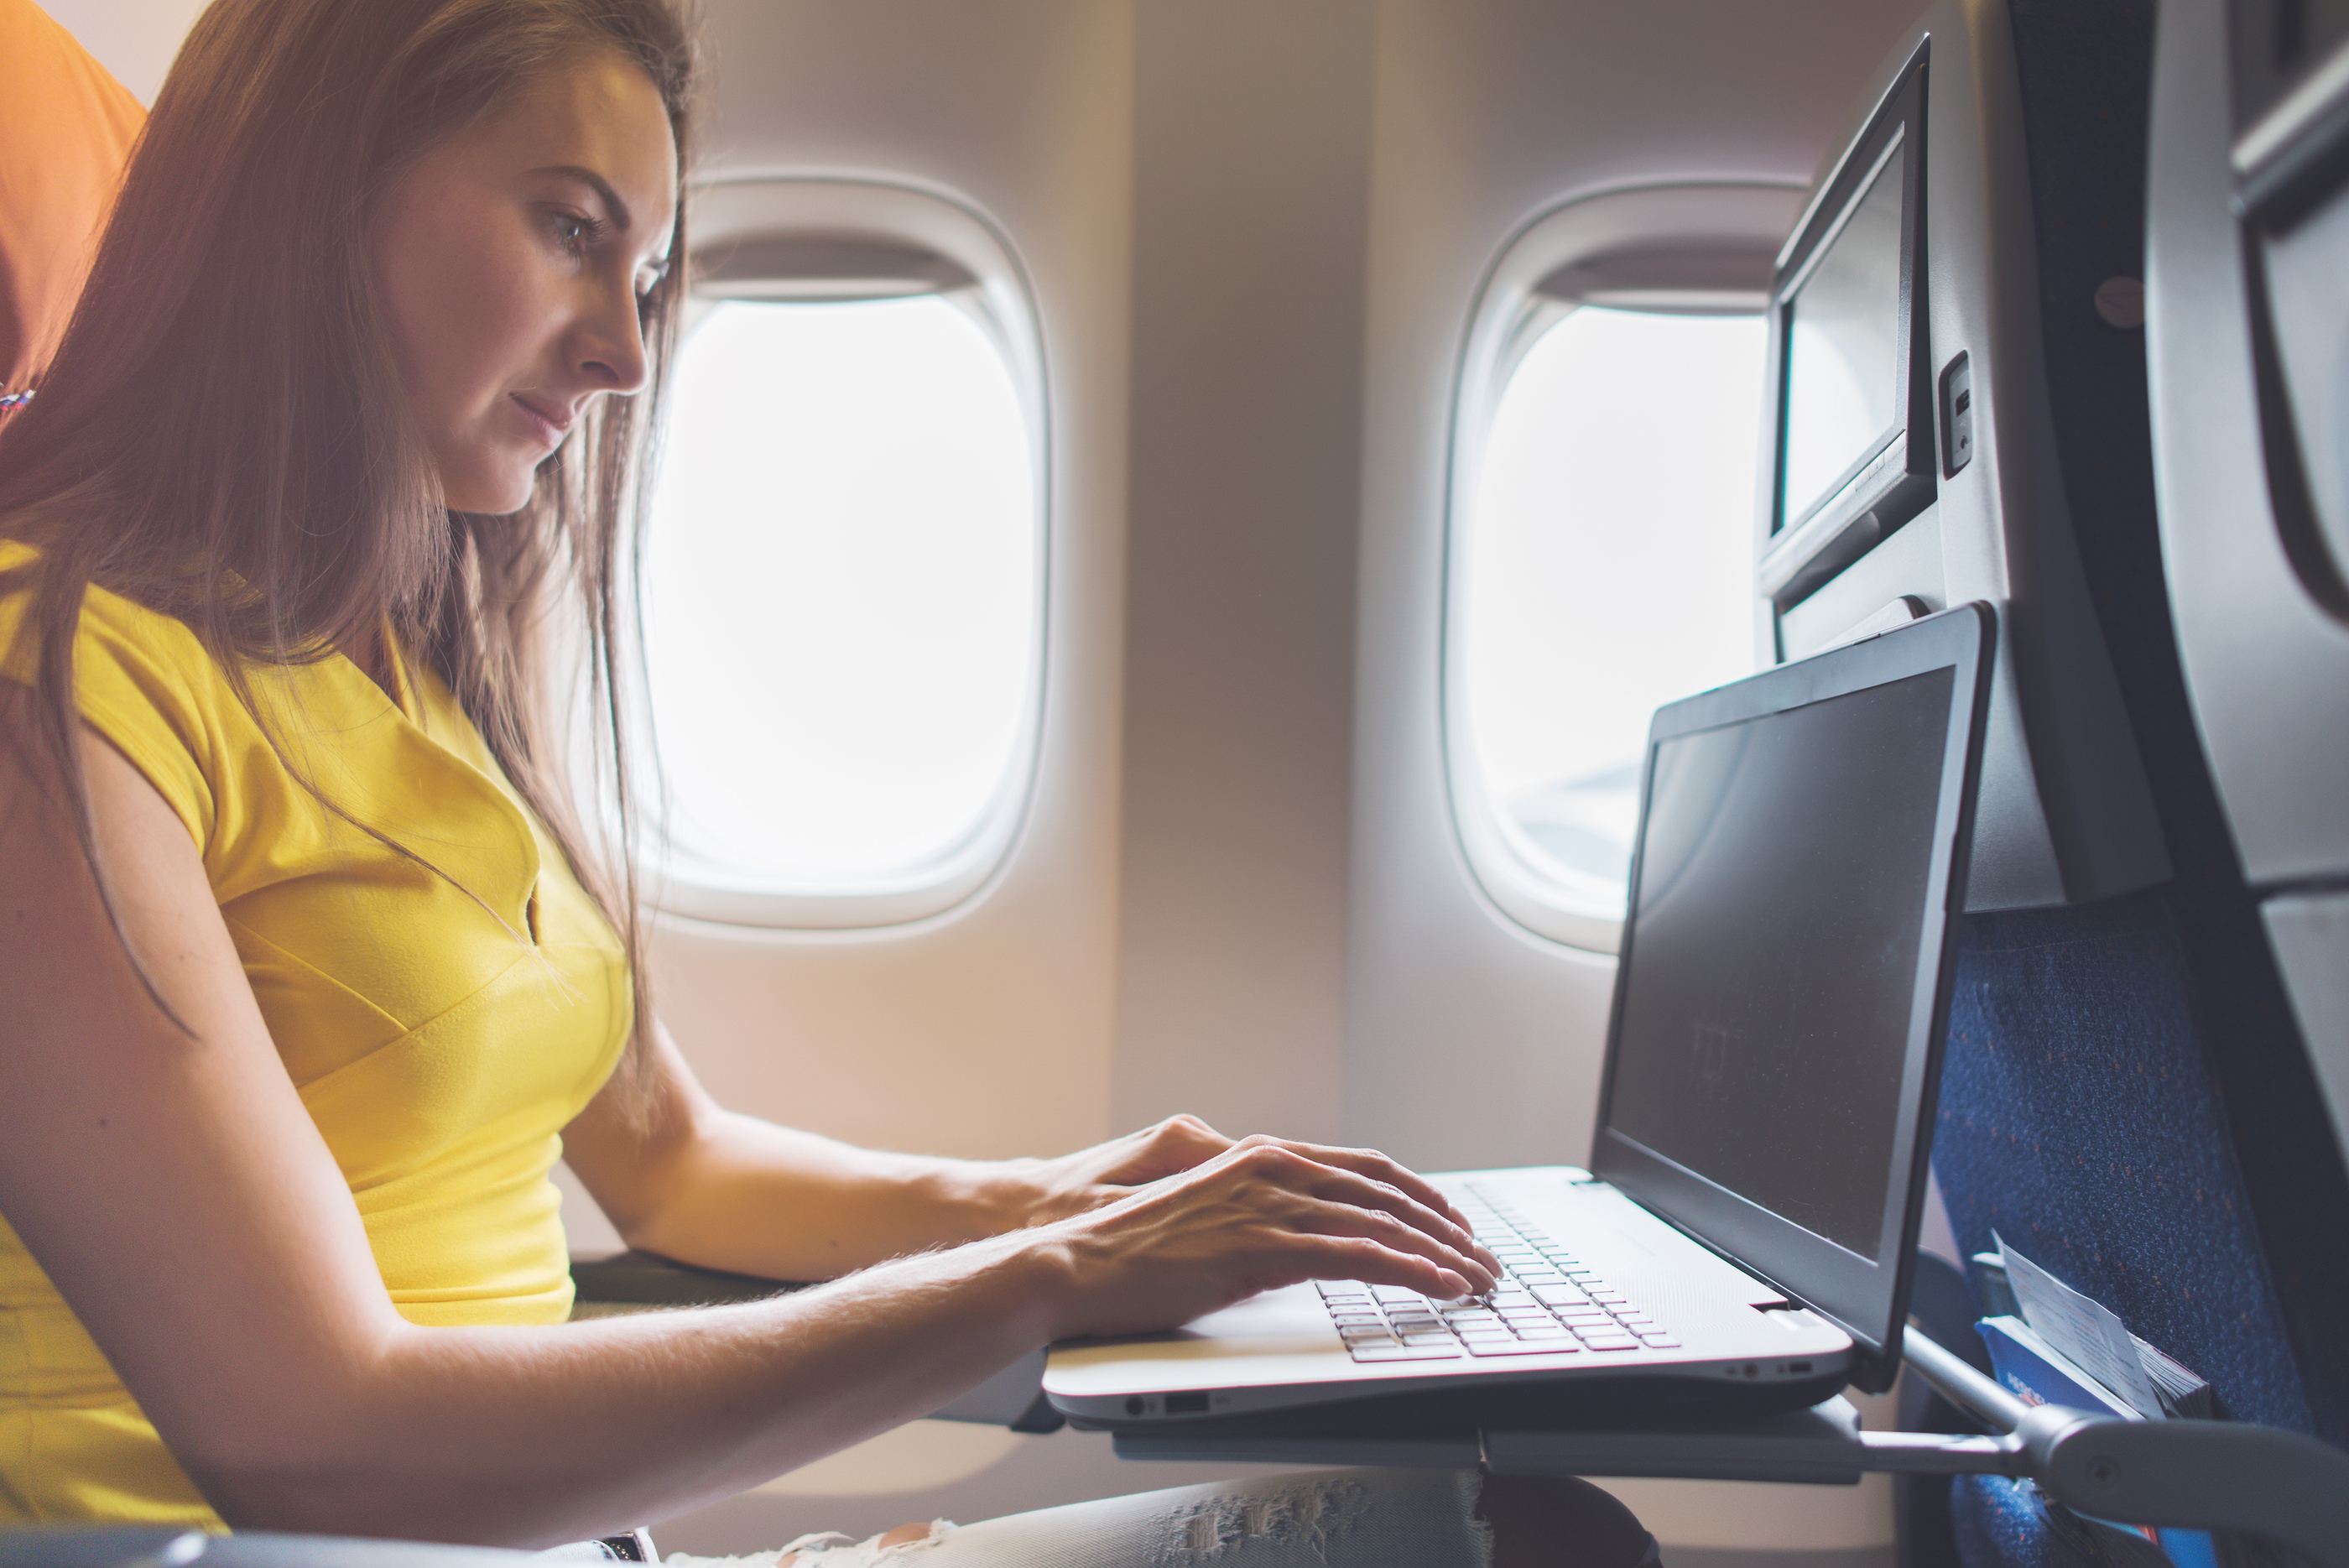 a woman sitting in an airplane using a laptop